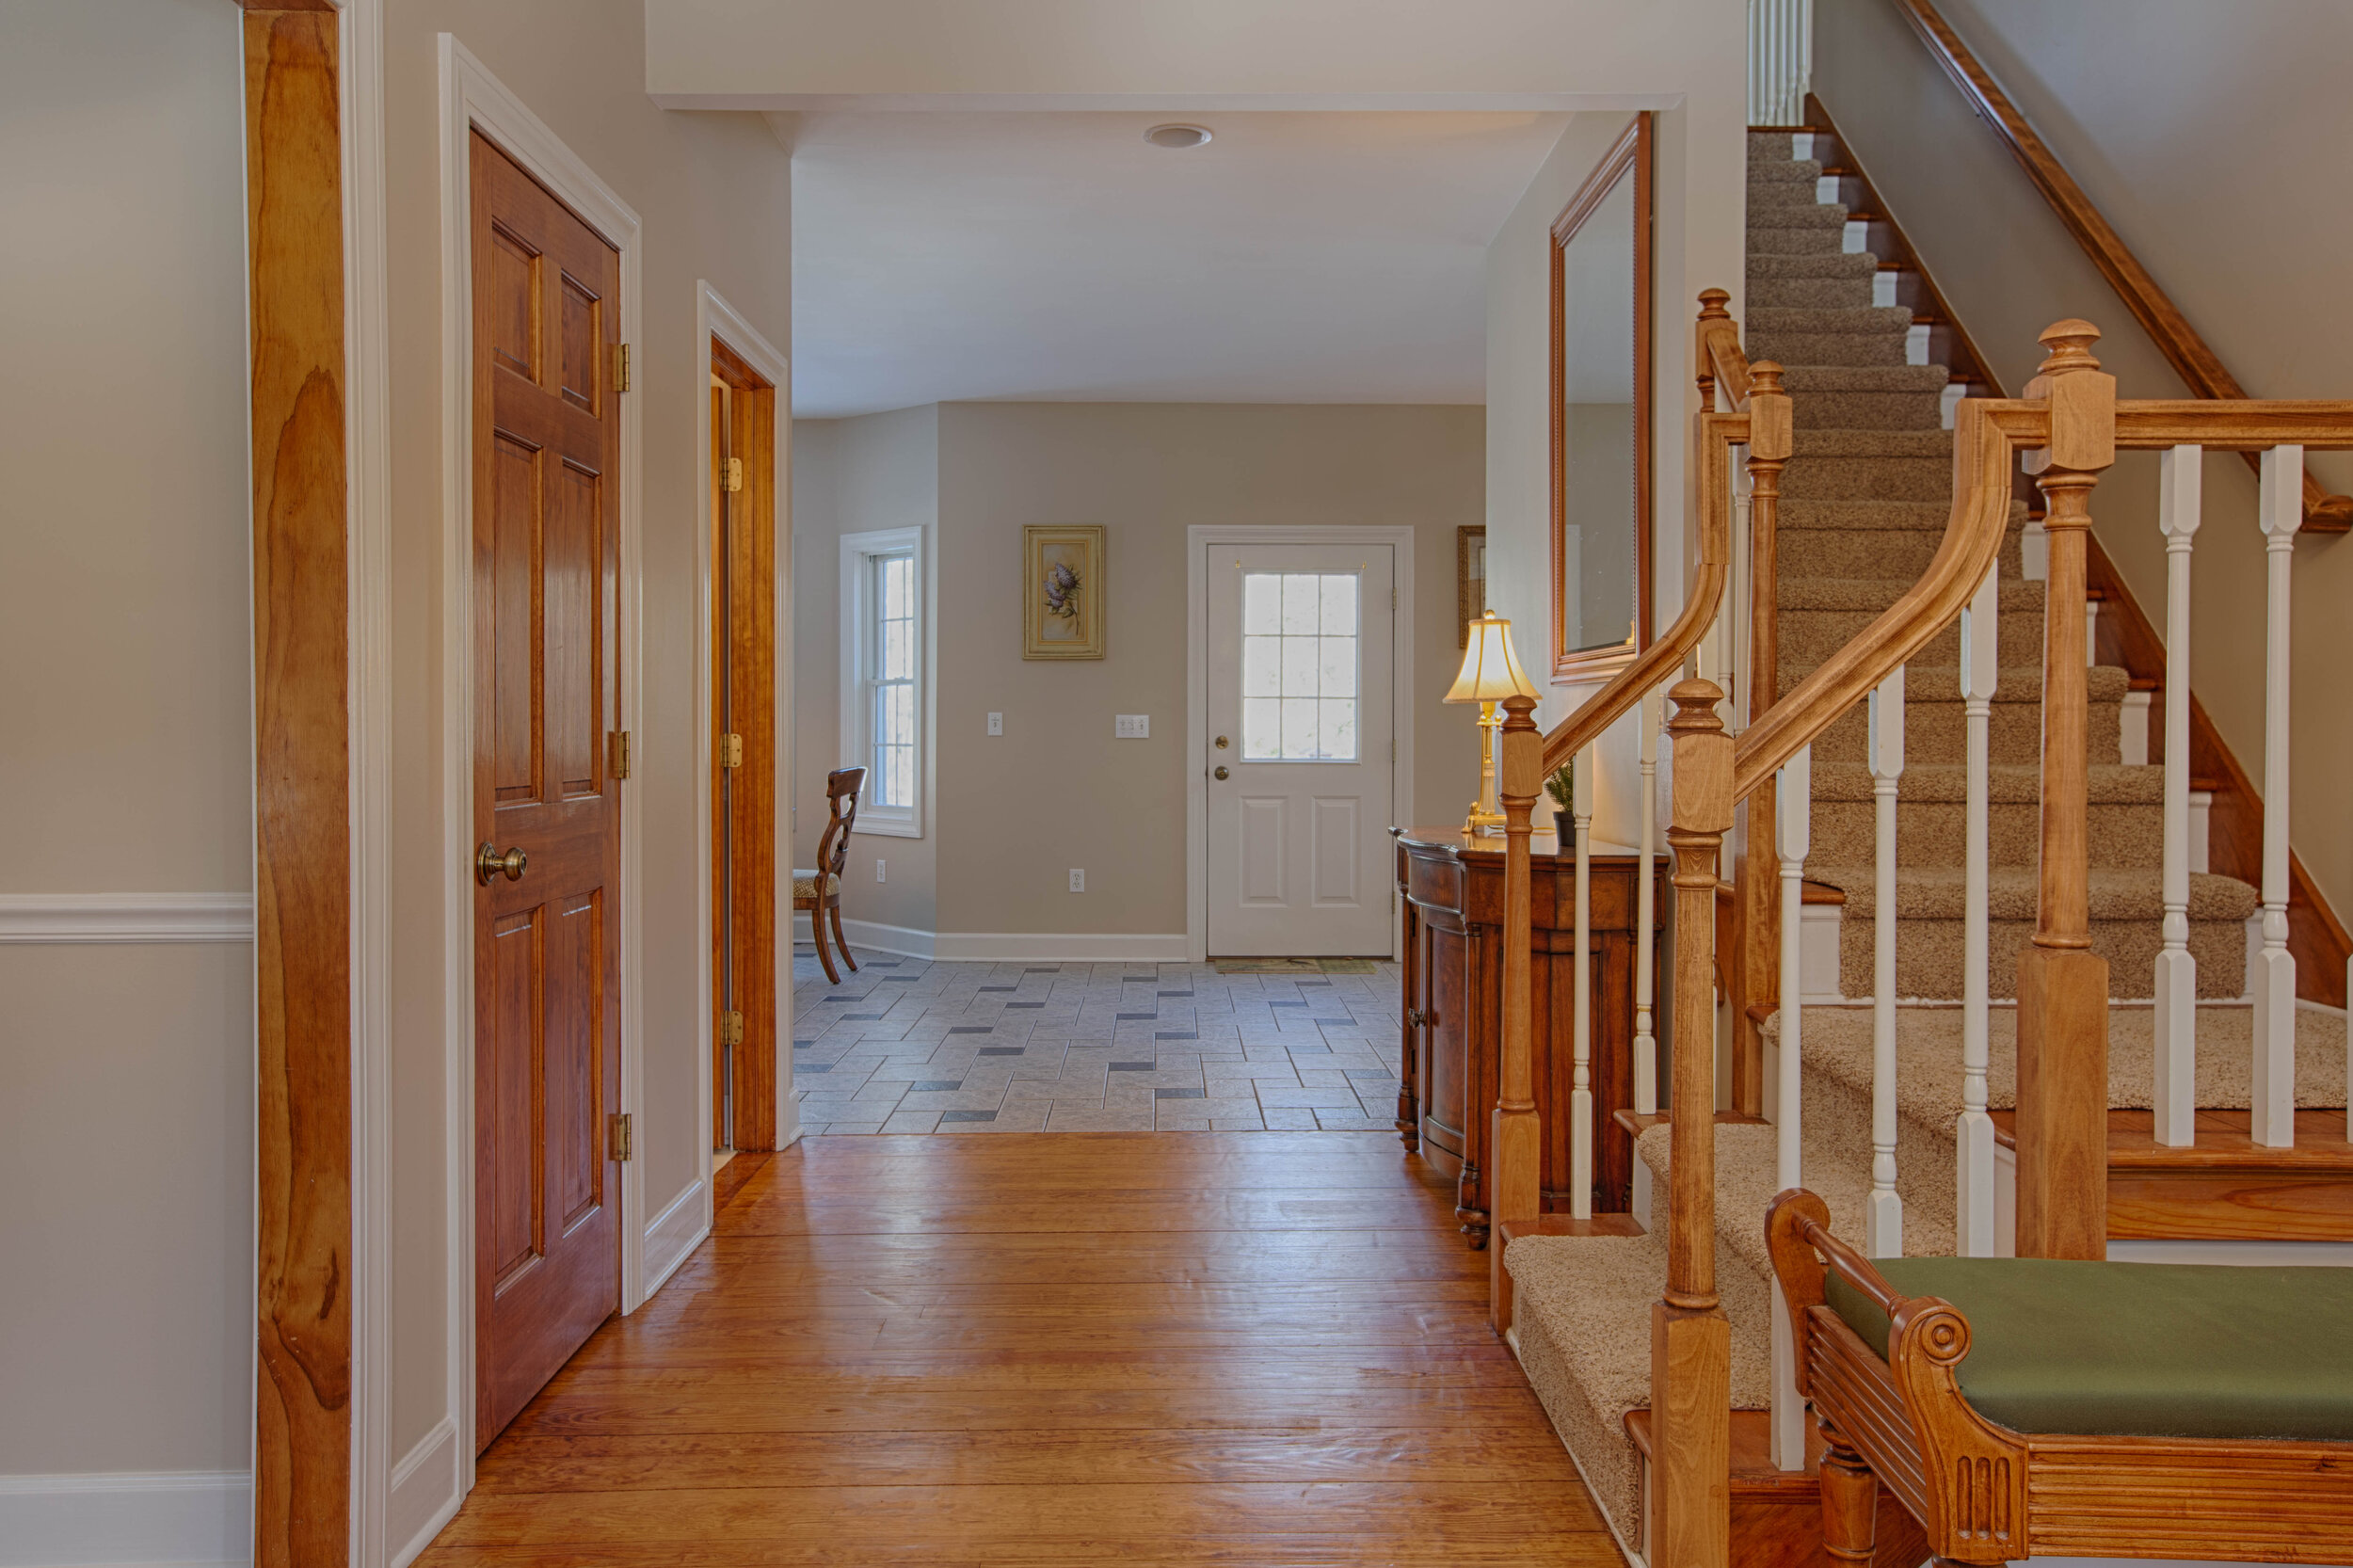  Picture of the hallway with closet door to the left and staircase to the right.  In front leads to the dining room/kitchen area. 